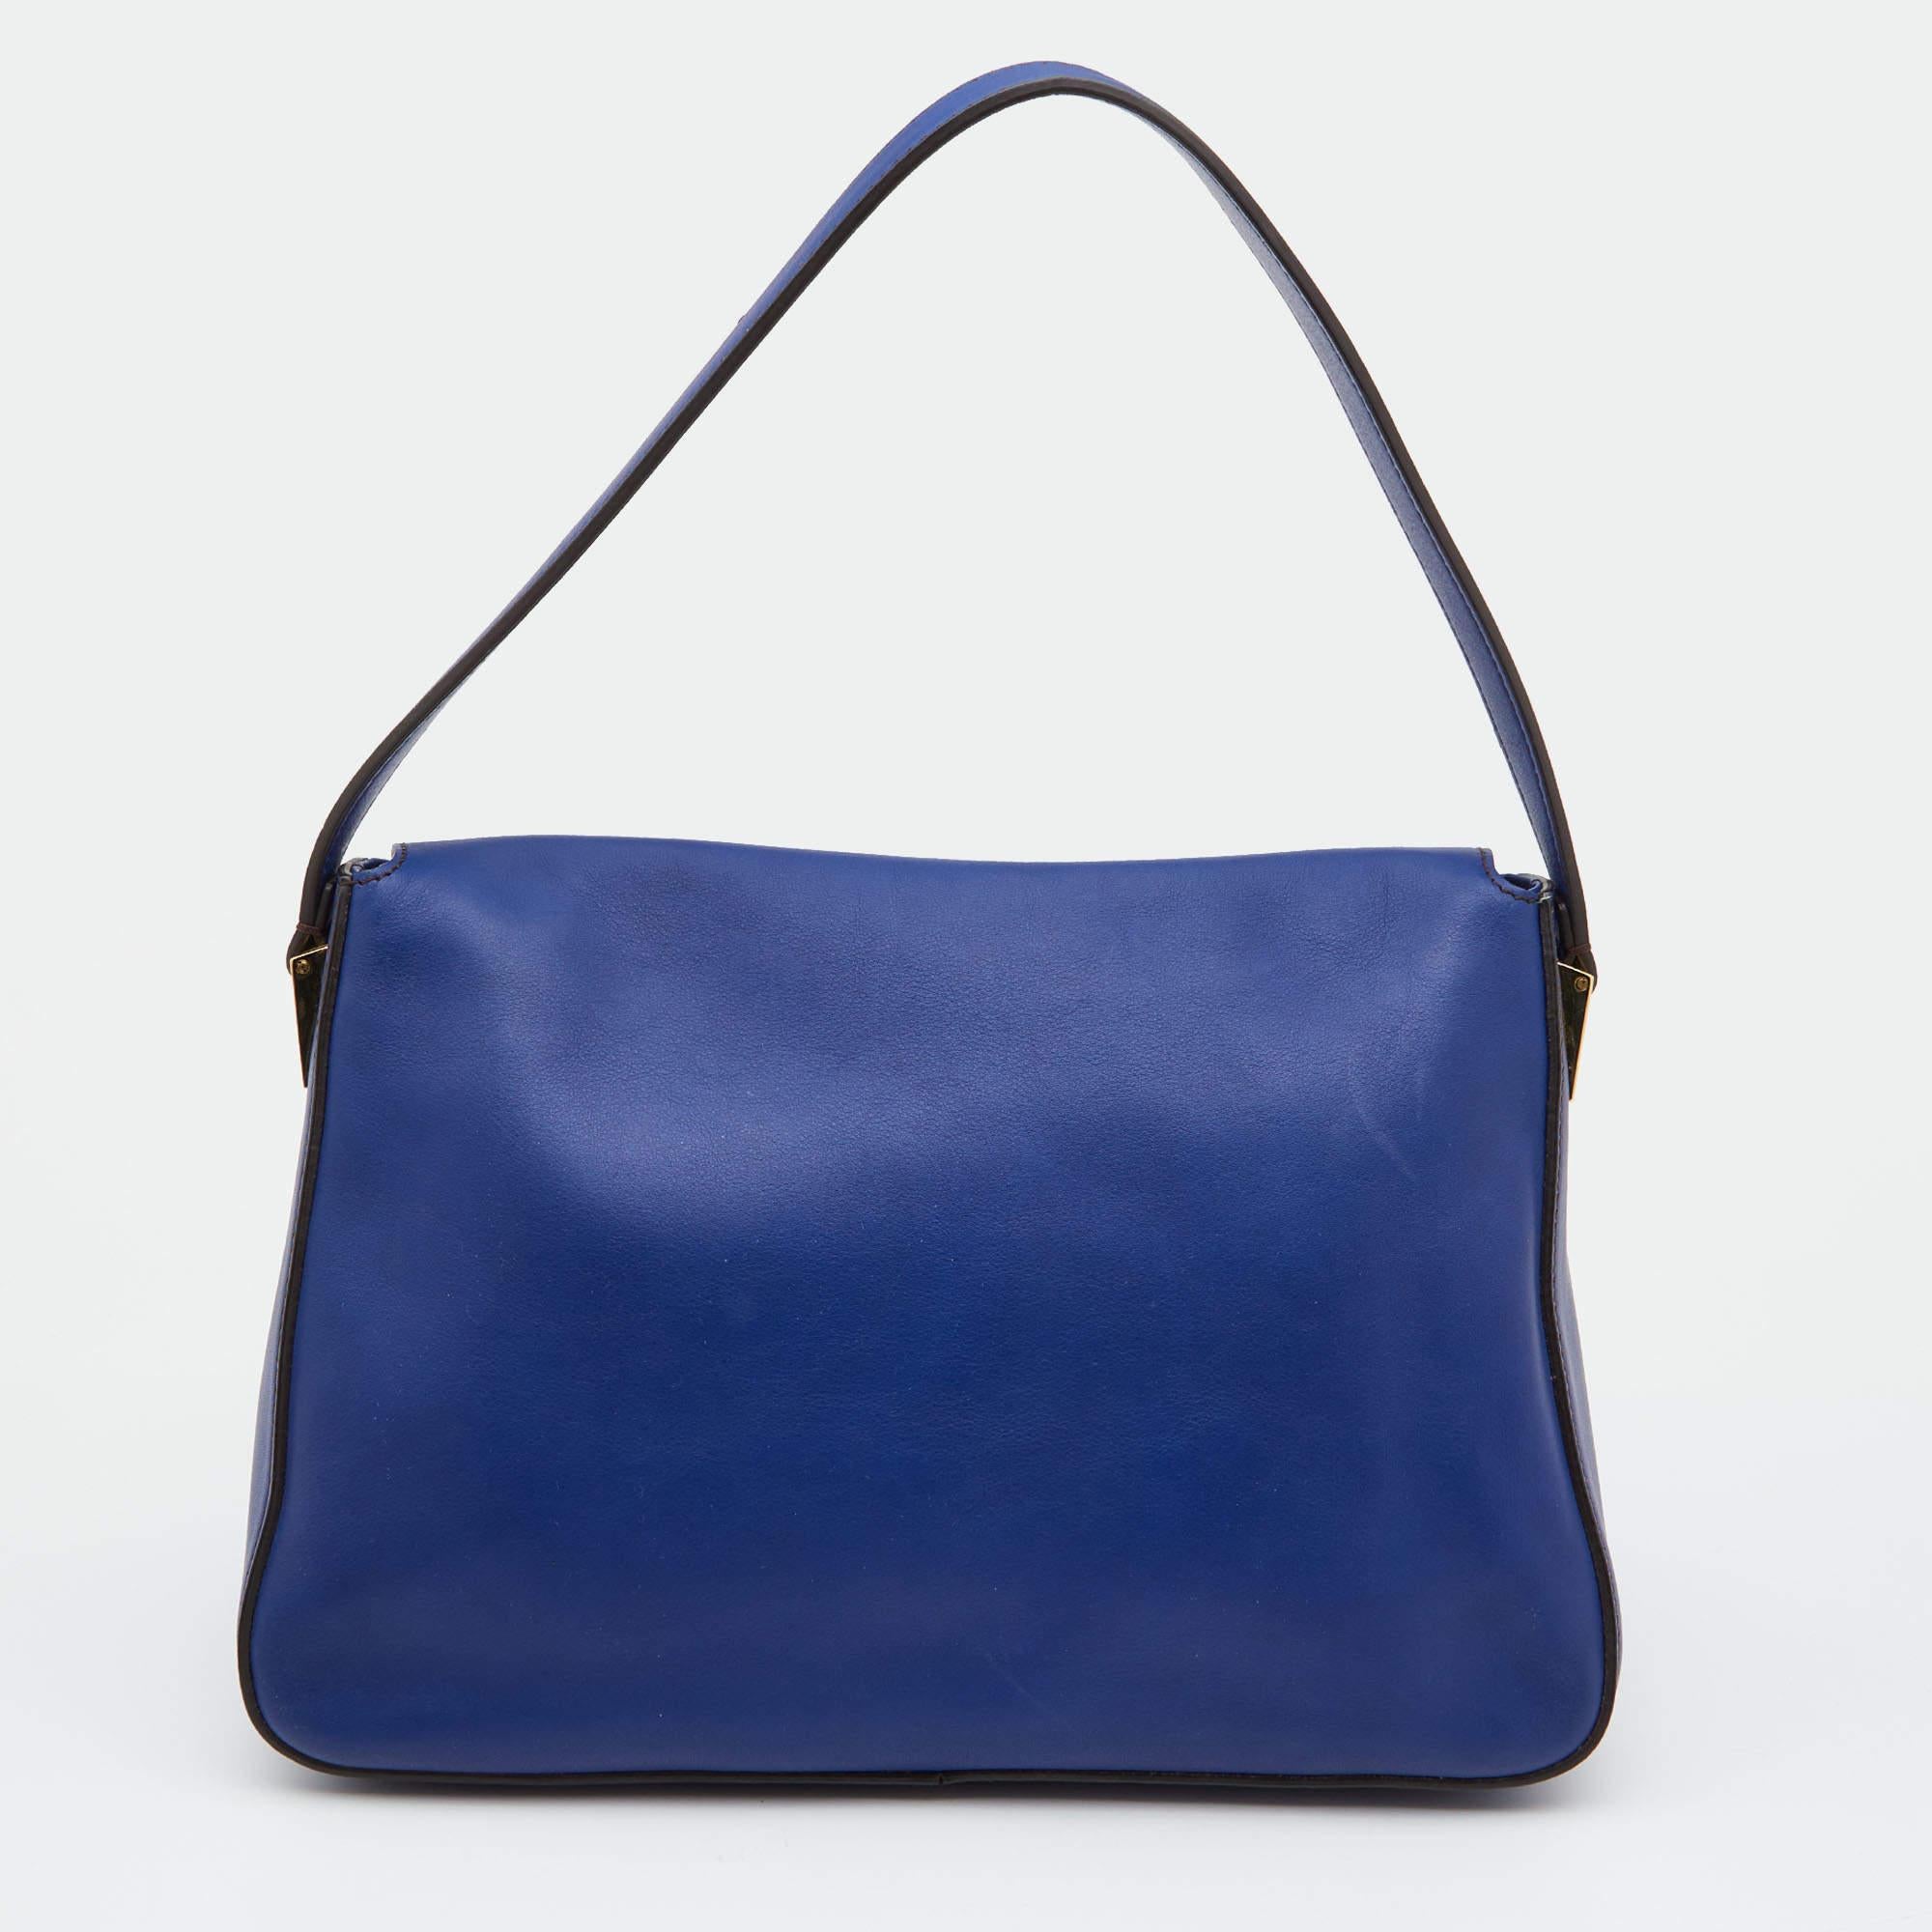 The Mama shoulder bag from Fendi is an all-time classic. Accented with the striking Forever lock on the front flap, the piece is presented in blue leather. A spacious interior and a leather strap complete the fabulous bag.

Includes: Original